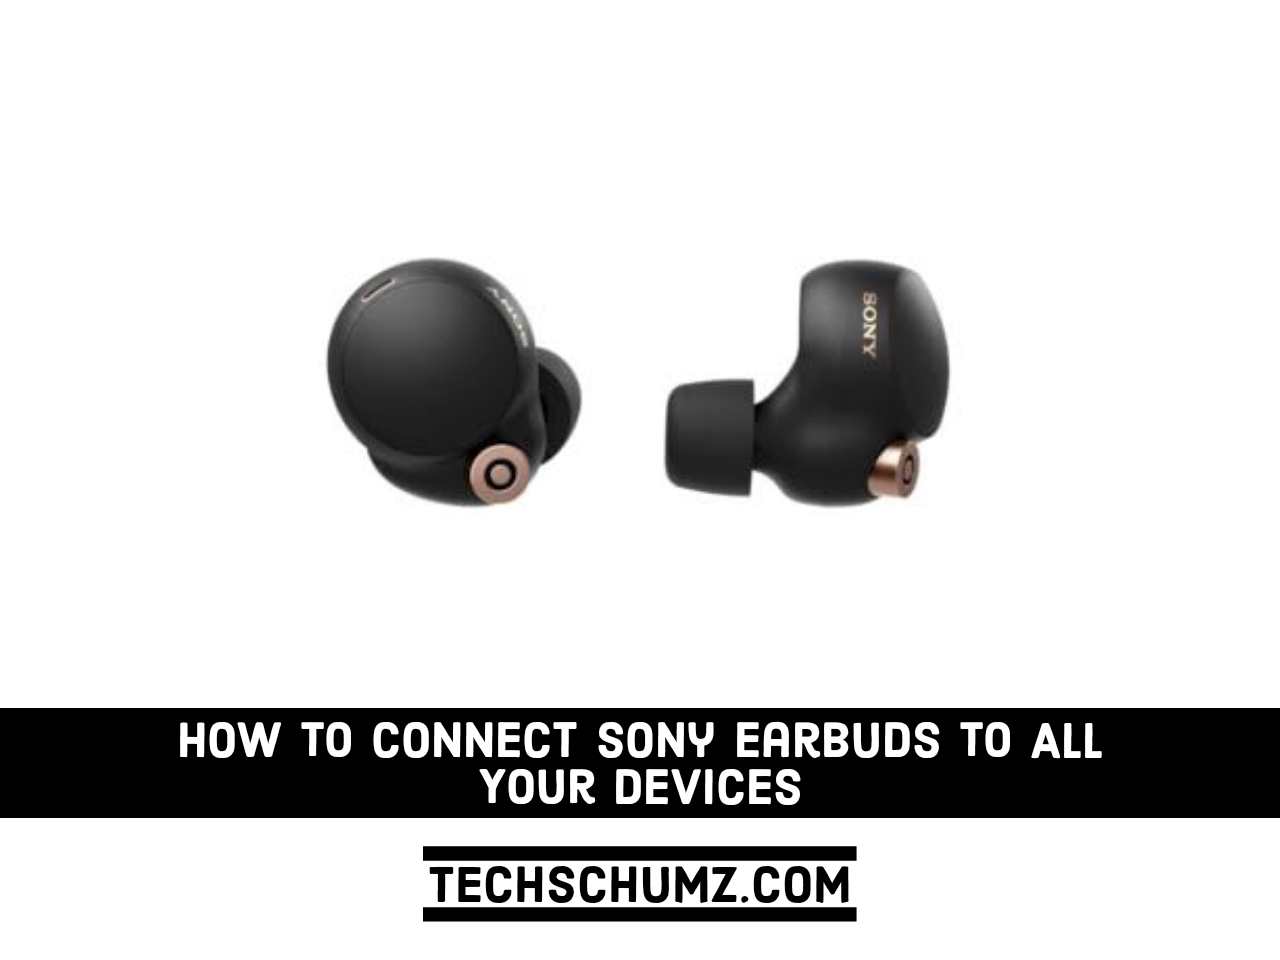 How to Connect Sony Earbuds to All Your Devices